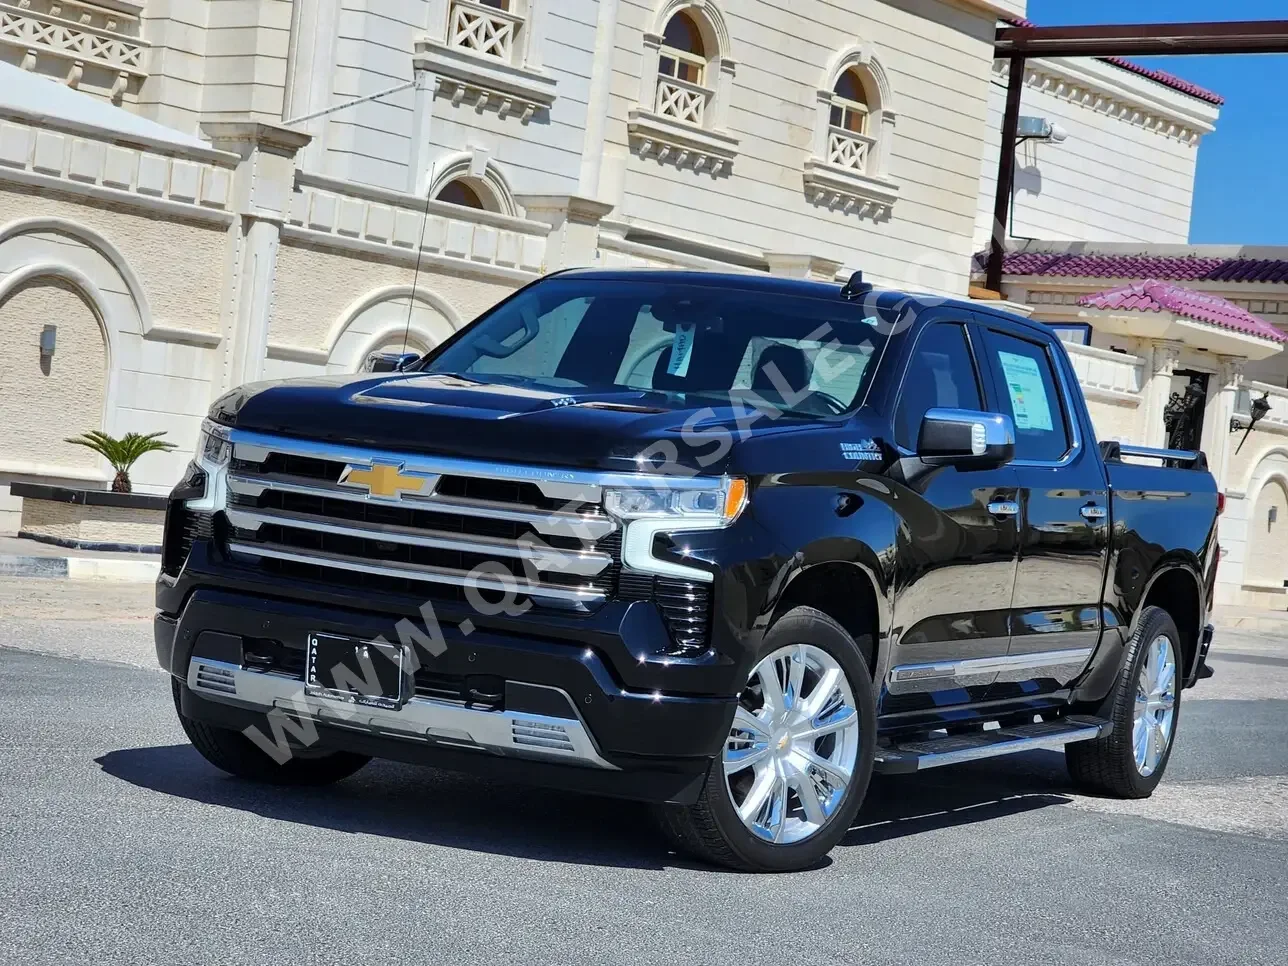 Chevrolet  Silverado  High Country  2022  Automatic  12,000 Km  8 Cylinder  Four Wheel Drive (4WD)  Pick Up  Black  With Warranty